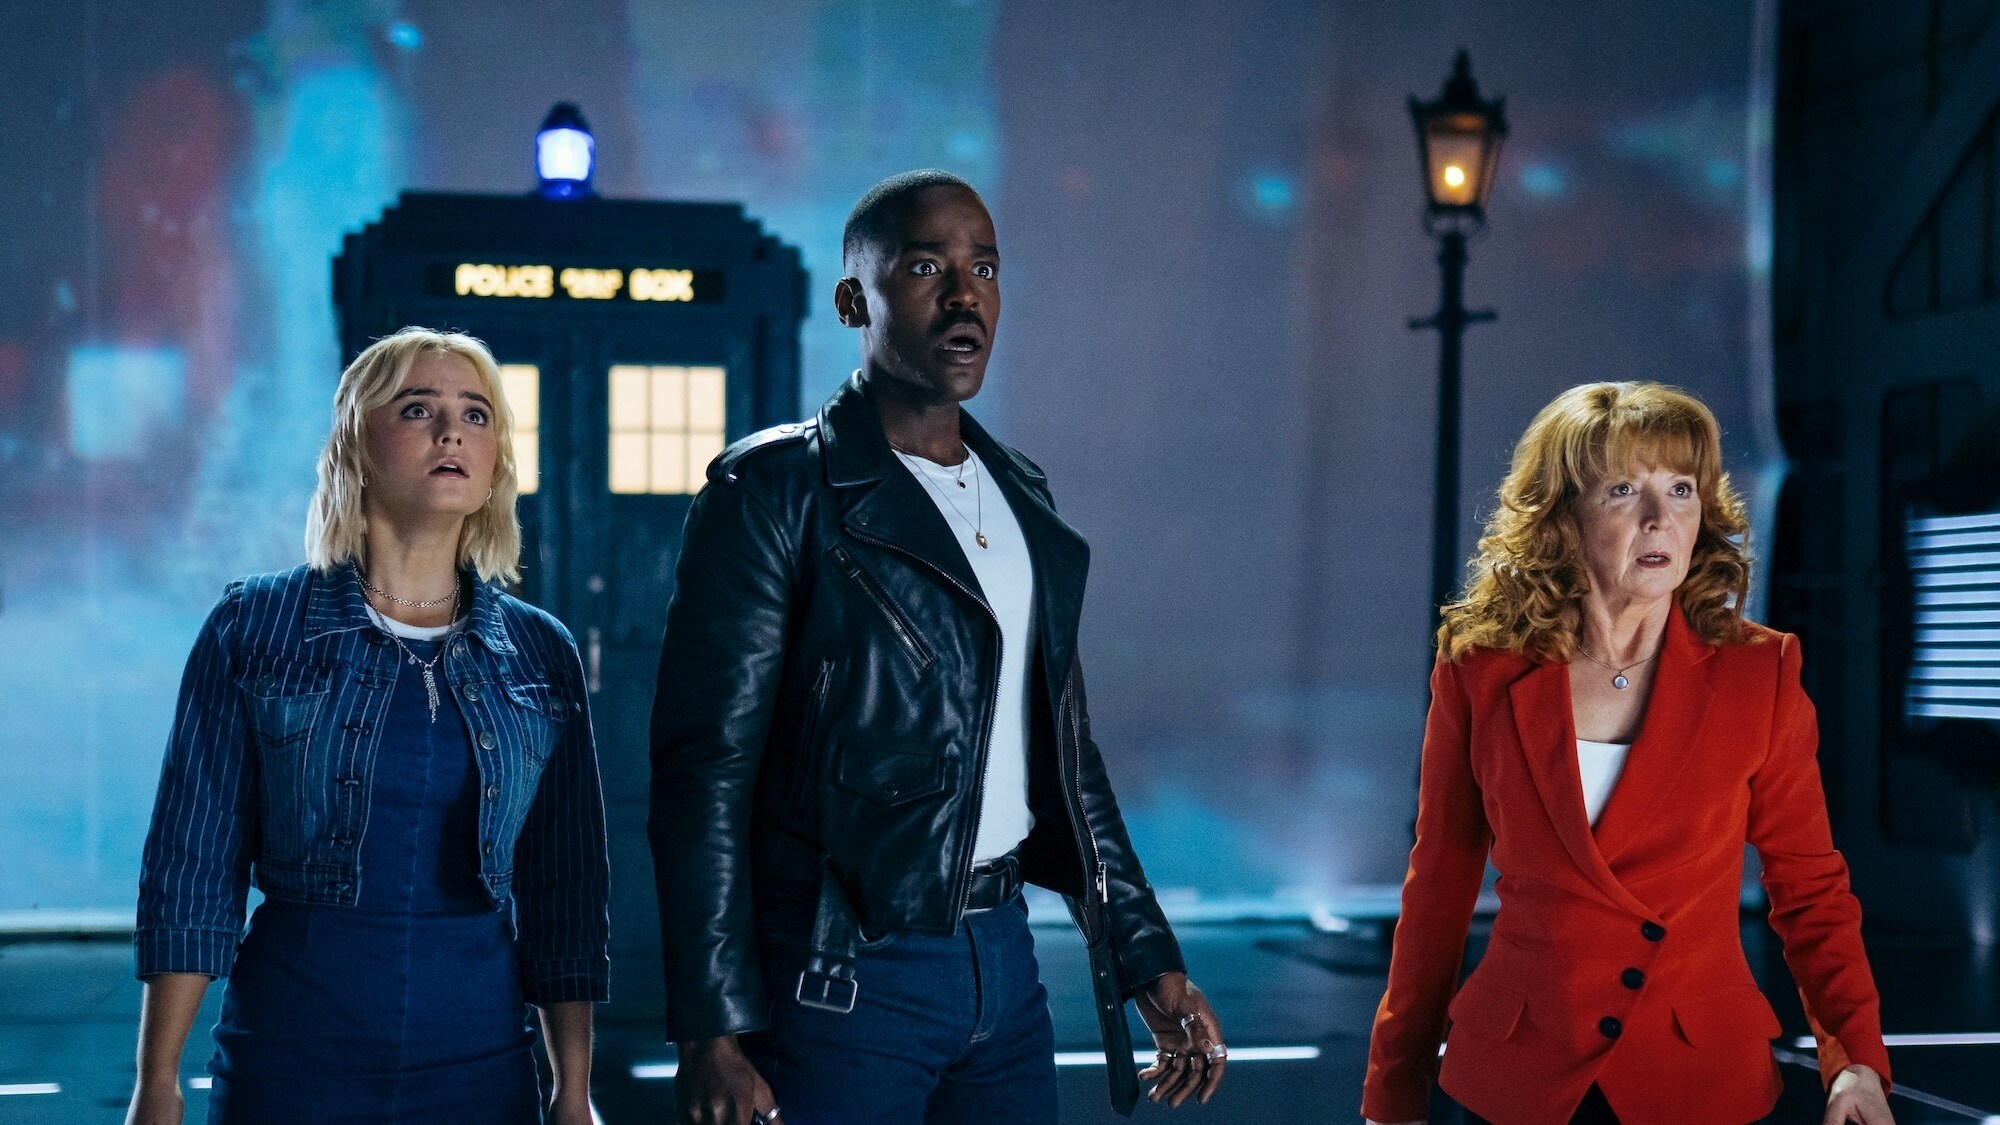 ‘Doctor Who’ Series 1 Review: A Fresh But Flawed Adventure